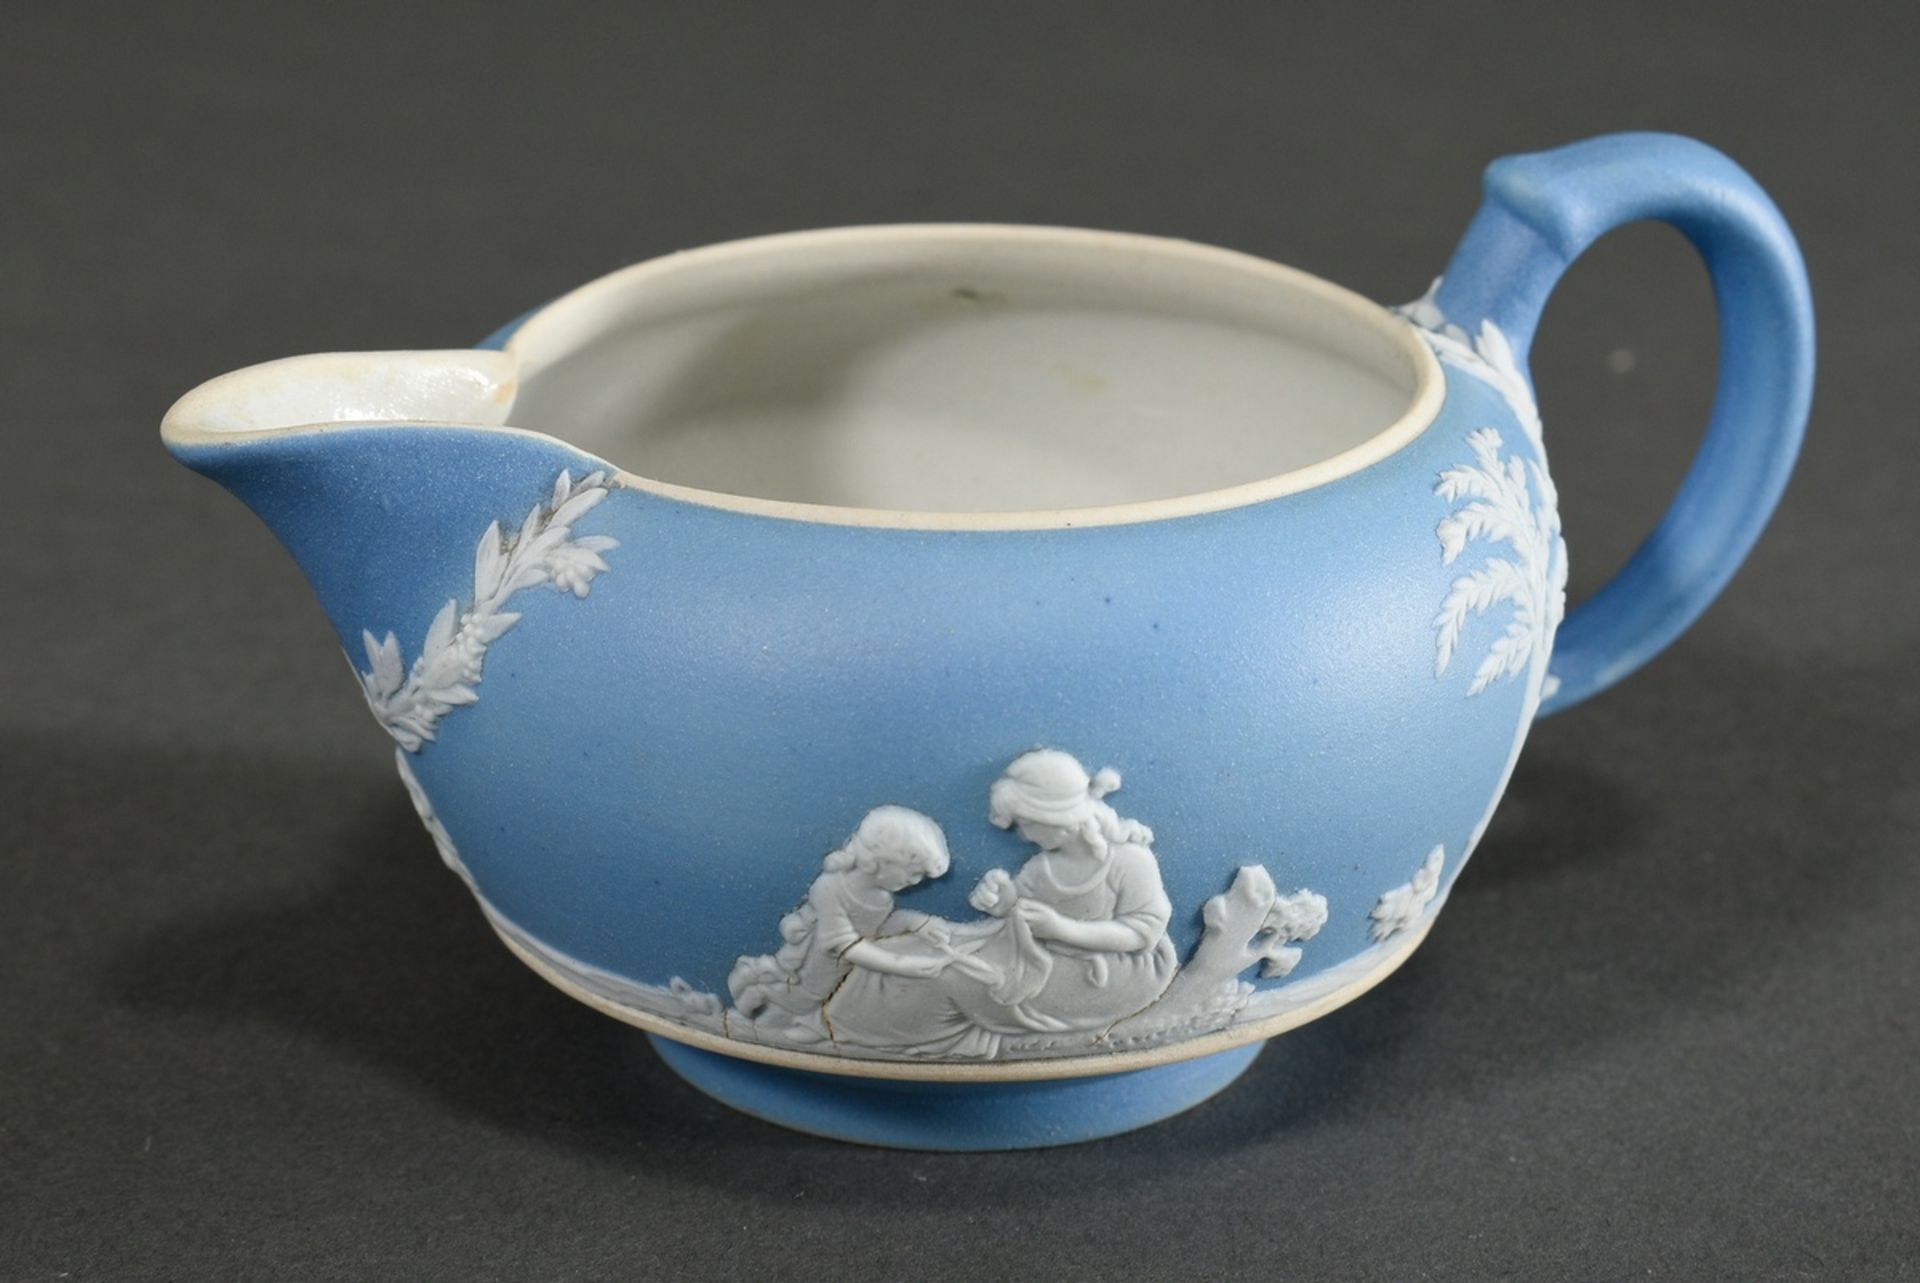 3 Various pieces of Wedgwood Jasperware Solitaire with classic bisque porcelain reliefs on a light  - Image 5 of 8